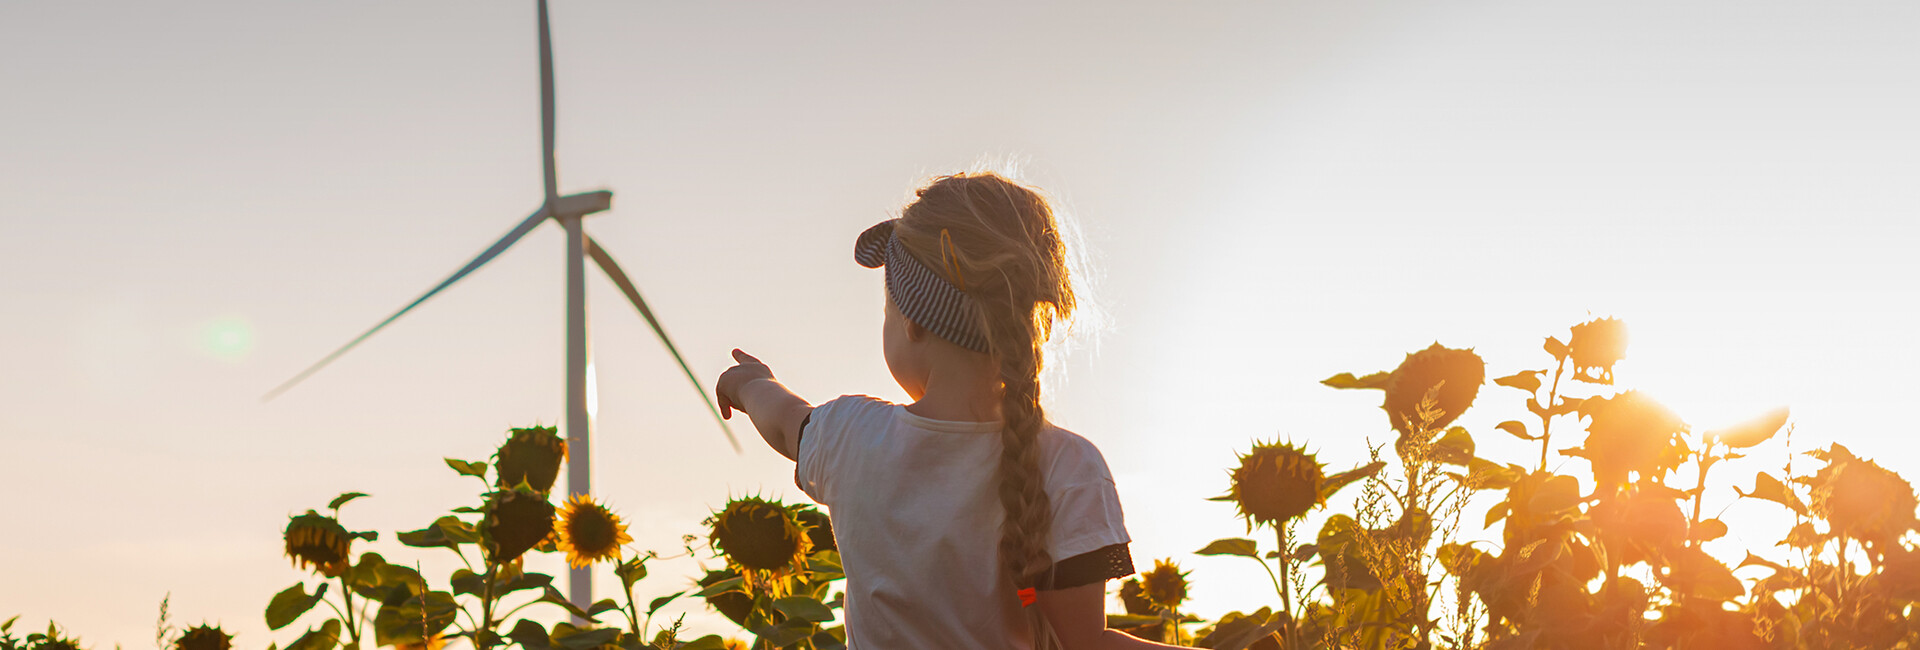 Girl pointing at a windmill in a field with sunflowers